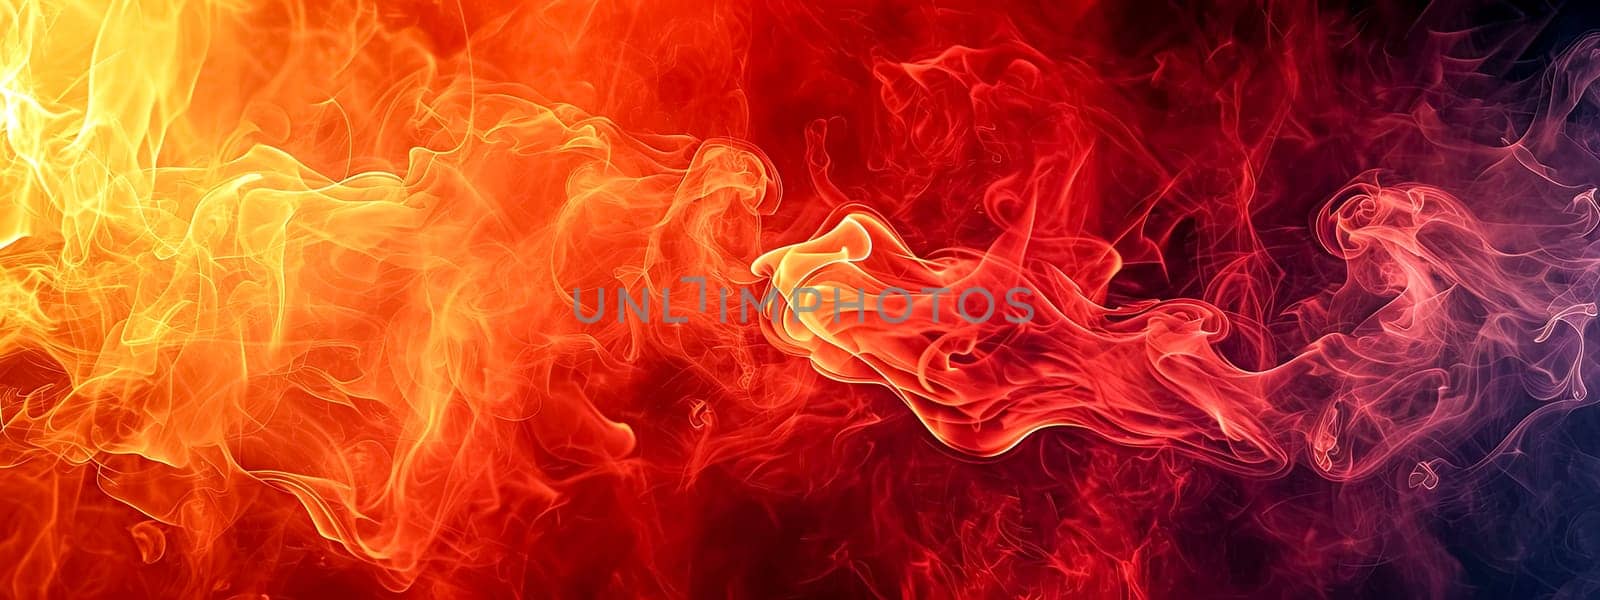 flames and smoke in red and orange hues on a gradient background, ideal for a fiery concept with ample space for text. by Edophoto